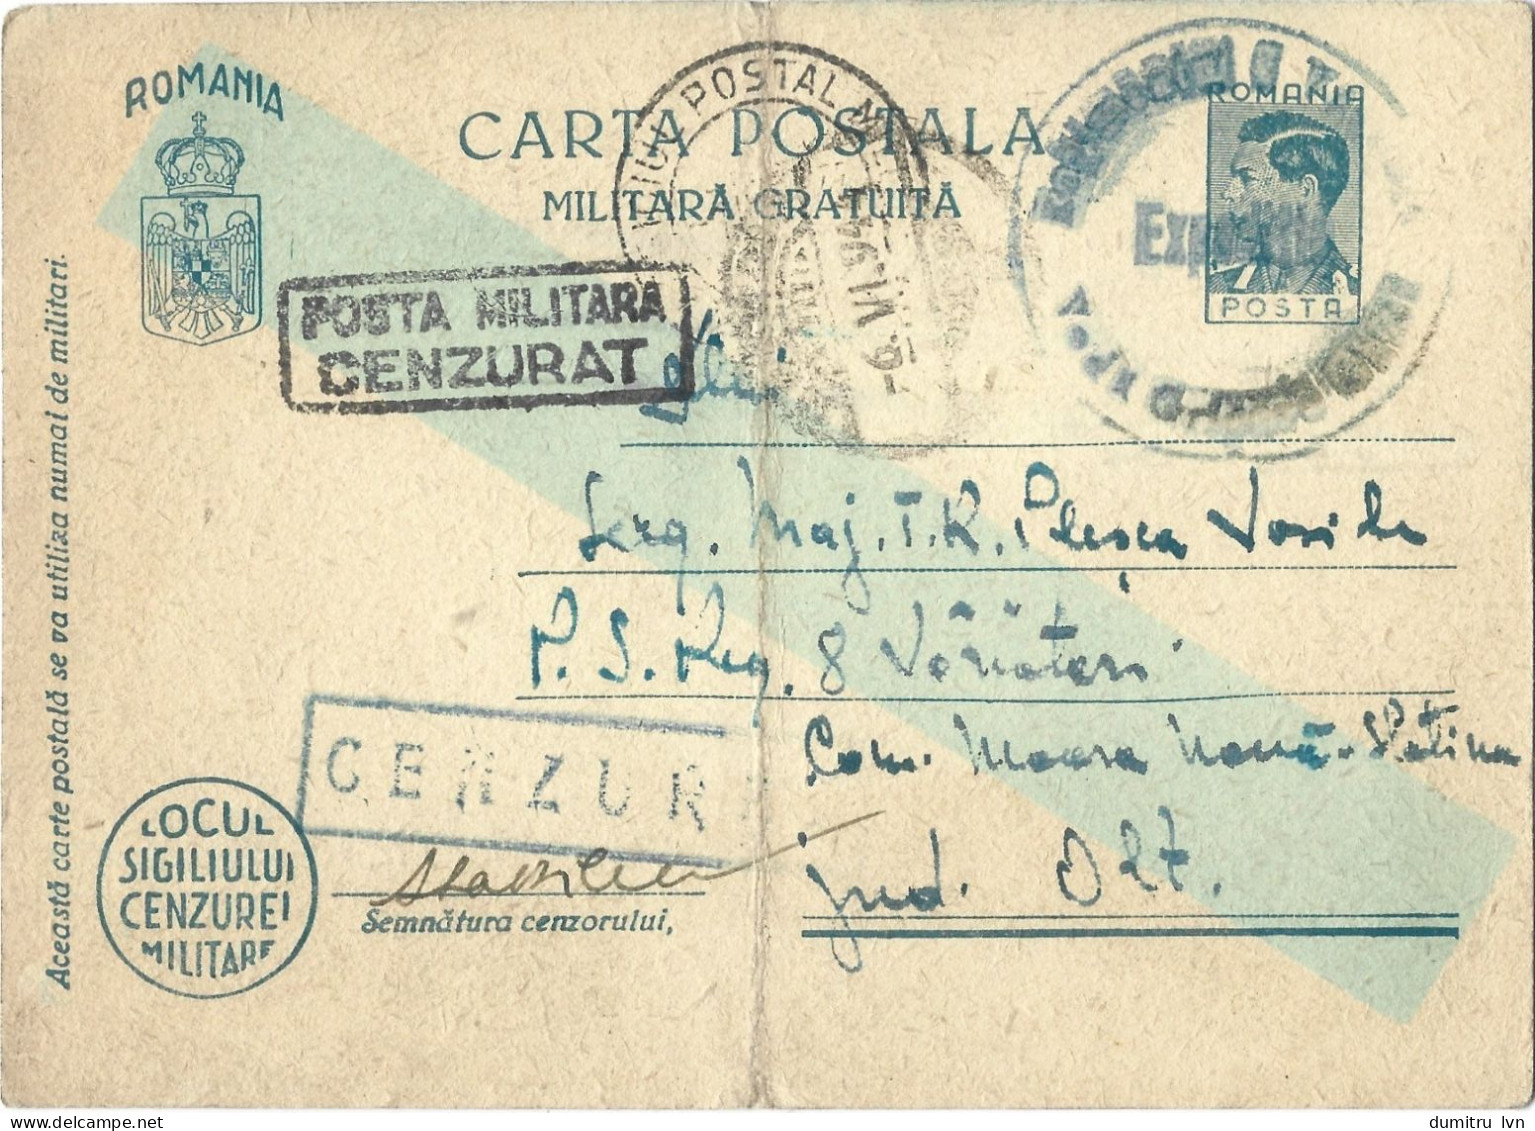 ROMANIA 1944 CENSORED, OPM.Nr.3805, FREE MILITARY, WW2 POSTCARD STATIONERY - Lettres 2ème Guerre Mondiale